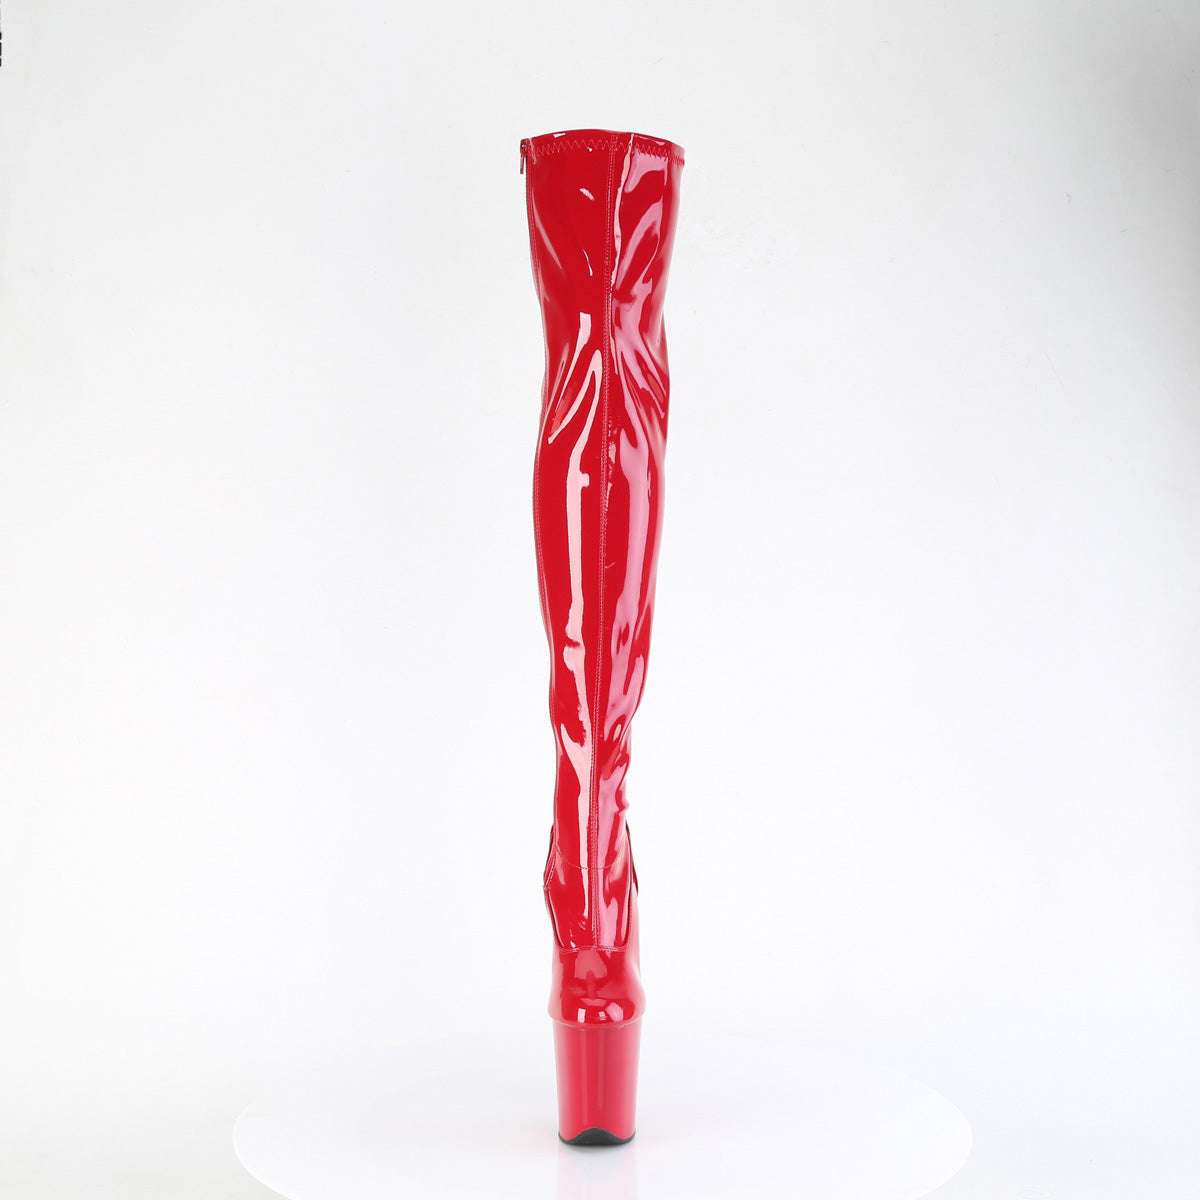 FLAMINGO-3000/R/M 8" PLEASER FAST DELIVERY 24-48h